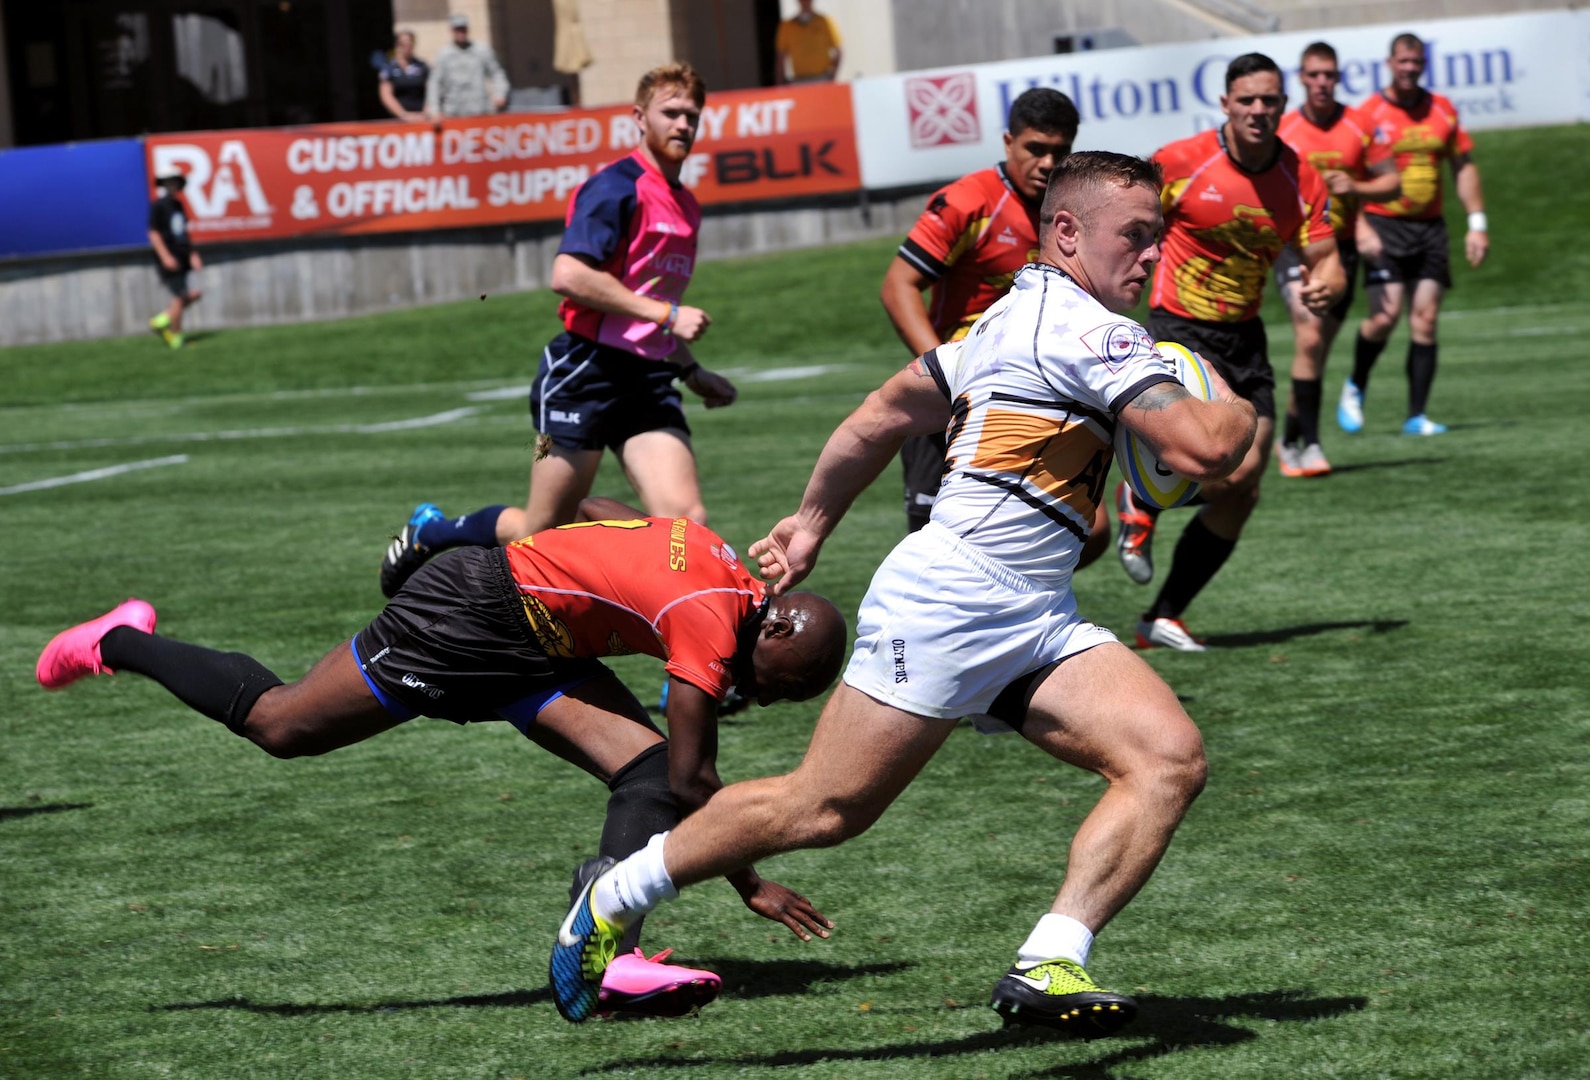 Ohio Army National Guard Spc. Zach Forro of Eastlake, Ohio, scores a try during All-Army's 52-0 victory over All-Marine Corps in the teams' opening game of the 2015 Armed Forces Rugby Sevens Championship Tournament on Friday at Infinity Park in Glendale, Colo. U.S. Army photo by Tim Hipps, IMCOM Public Affairs 